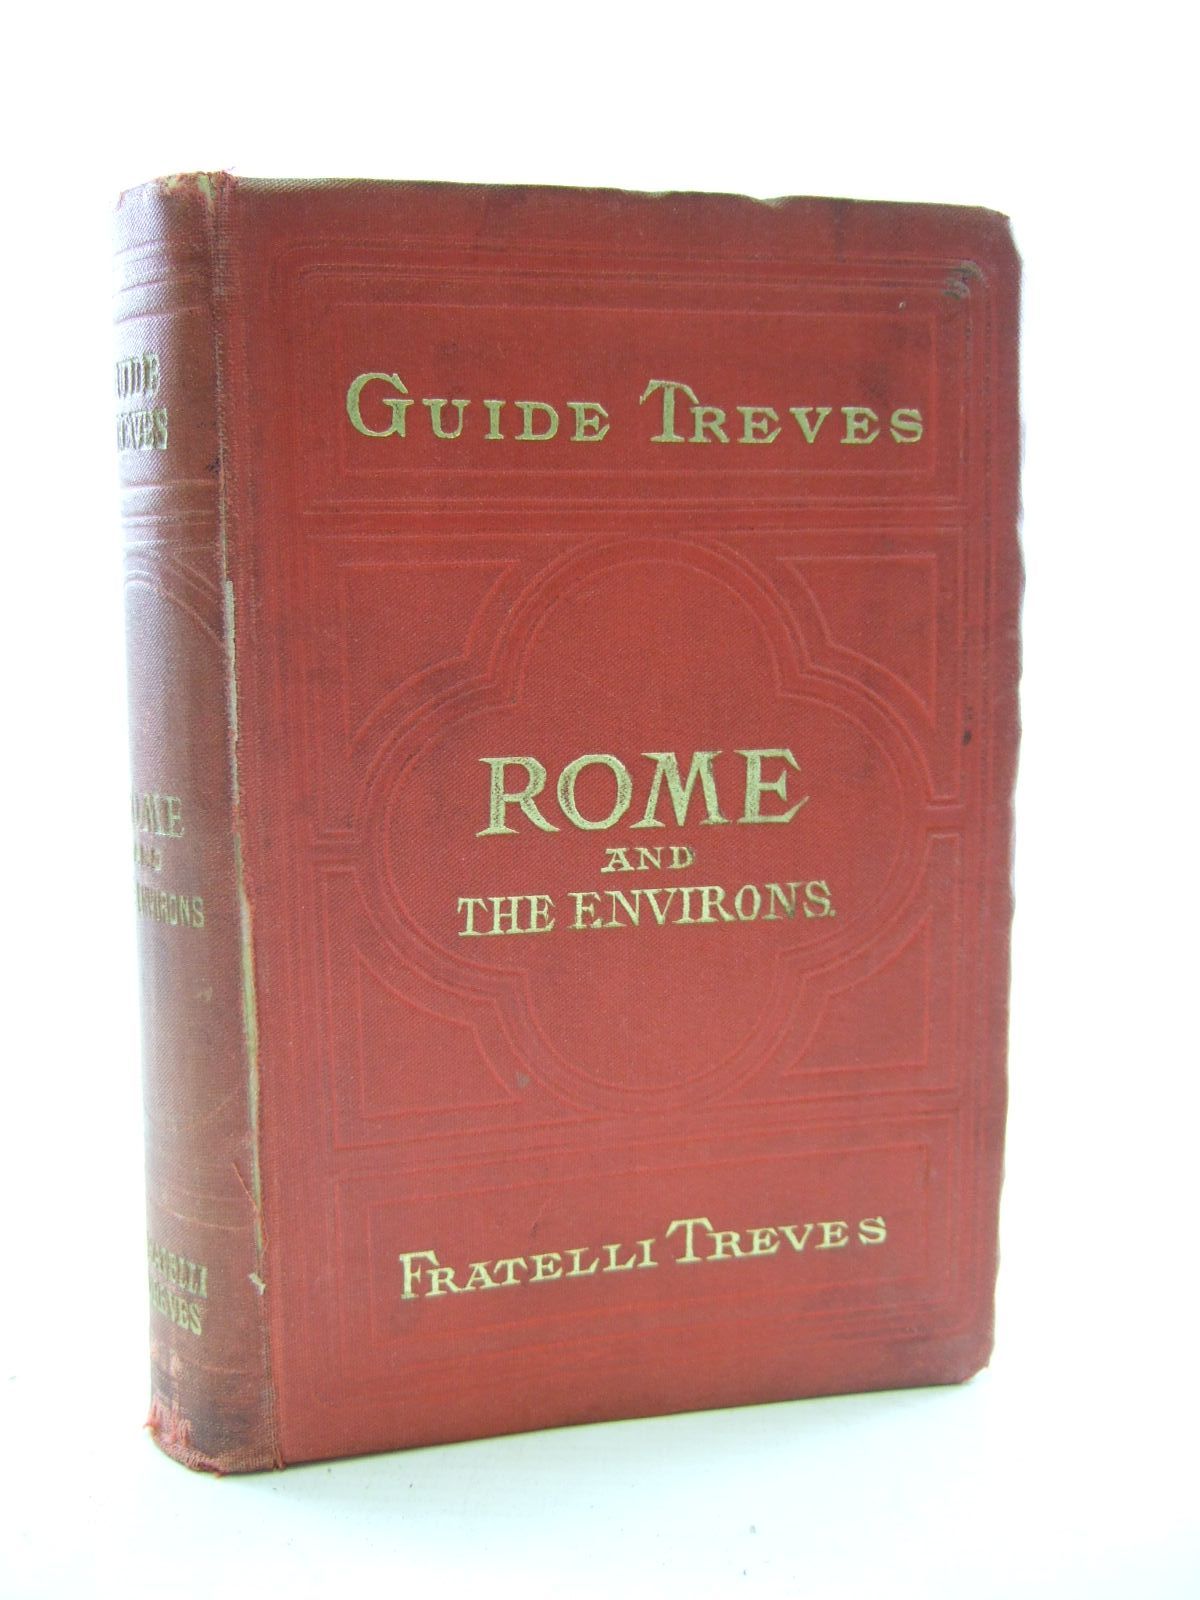 Photo of ROME AND THE ENVIRONS published by Fratellii Treves (STOCK CODE: 1206800)  for sale by Stella & Rose's Books